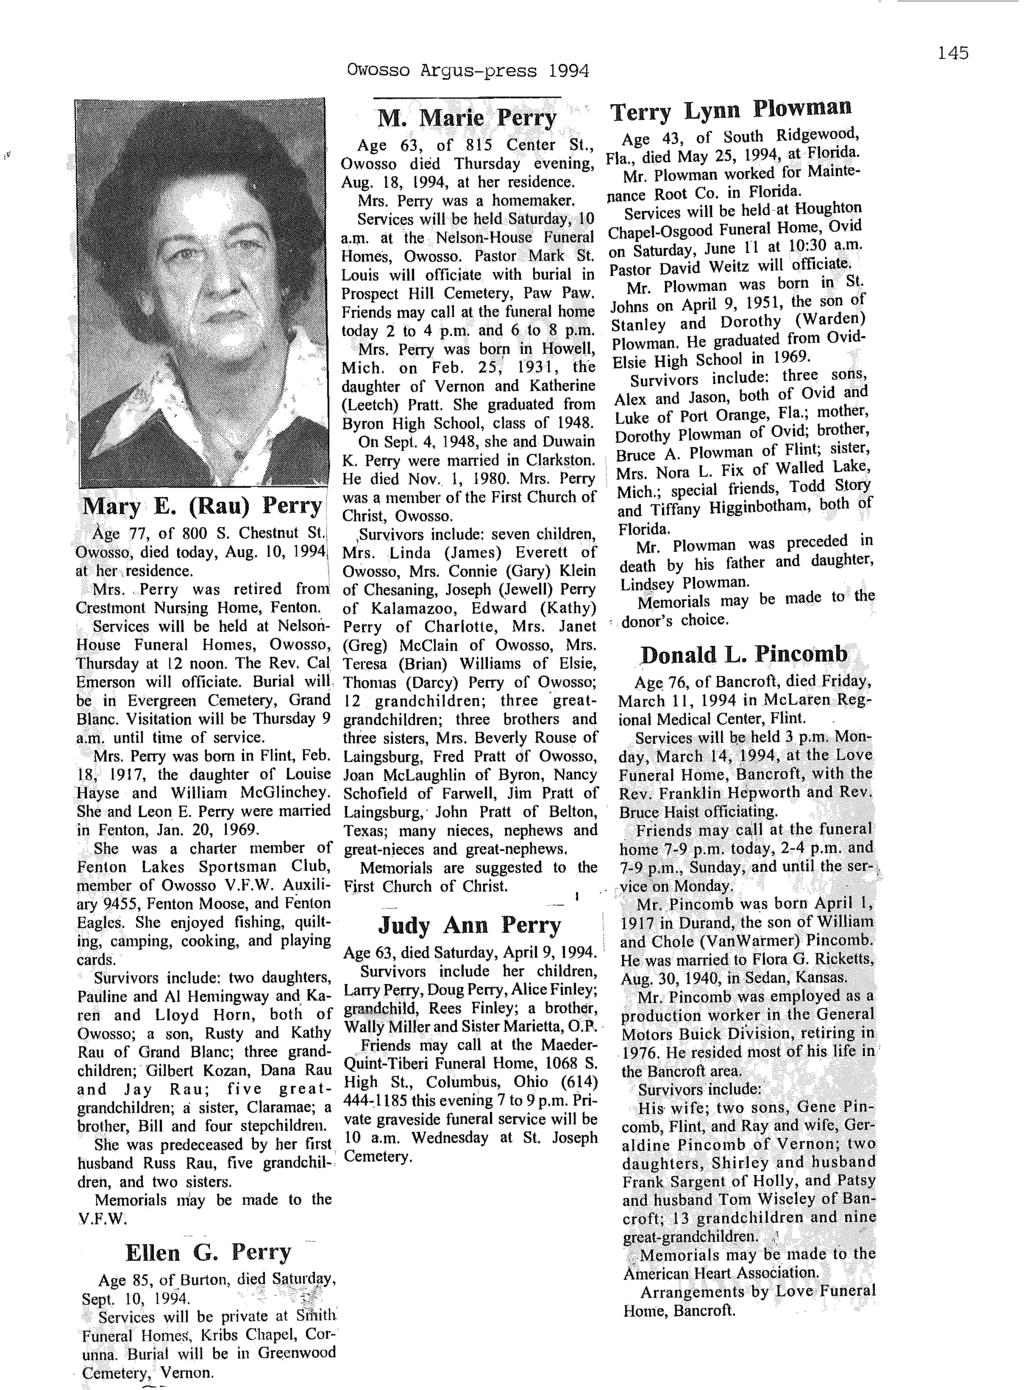 Owosso Argus-press 1994 M. Marie Perry Age 63, of 815 Center St., Owosso died Thursday evening, Aug. 18, 1994, at her residence. Mrs. Perry was a homemaker. Services will be held Saturday, 10 a.jp.